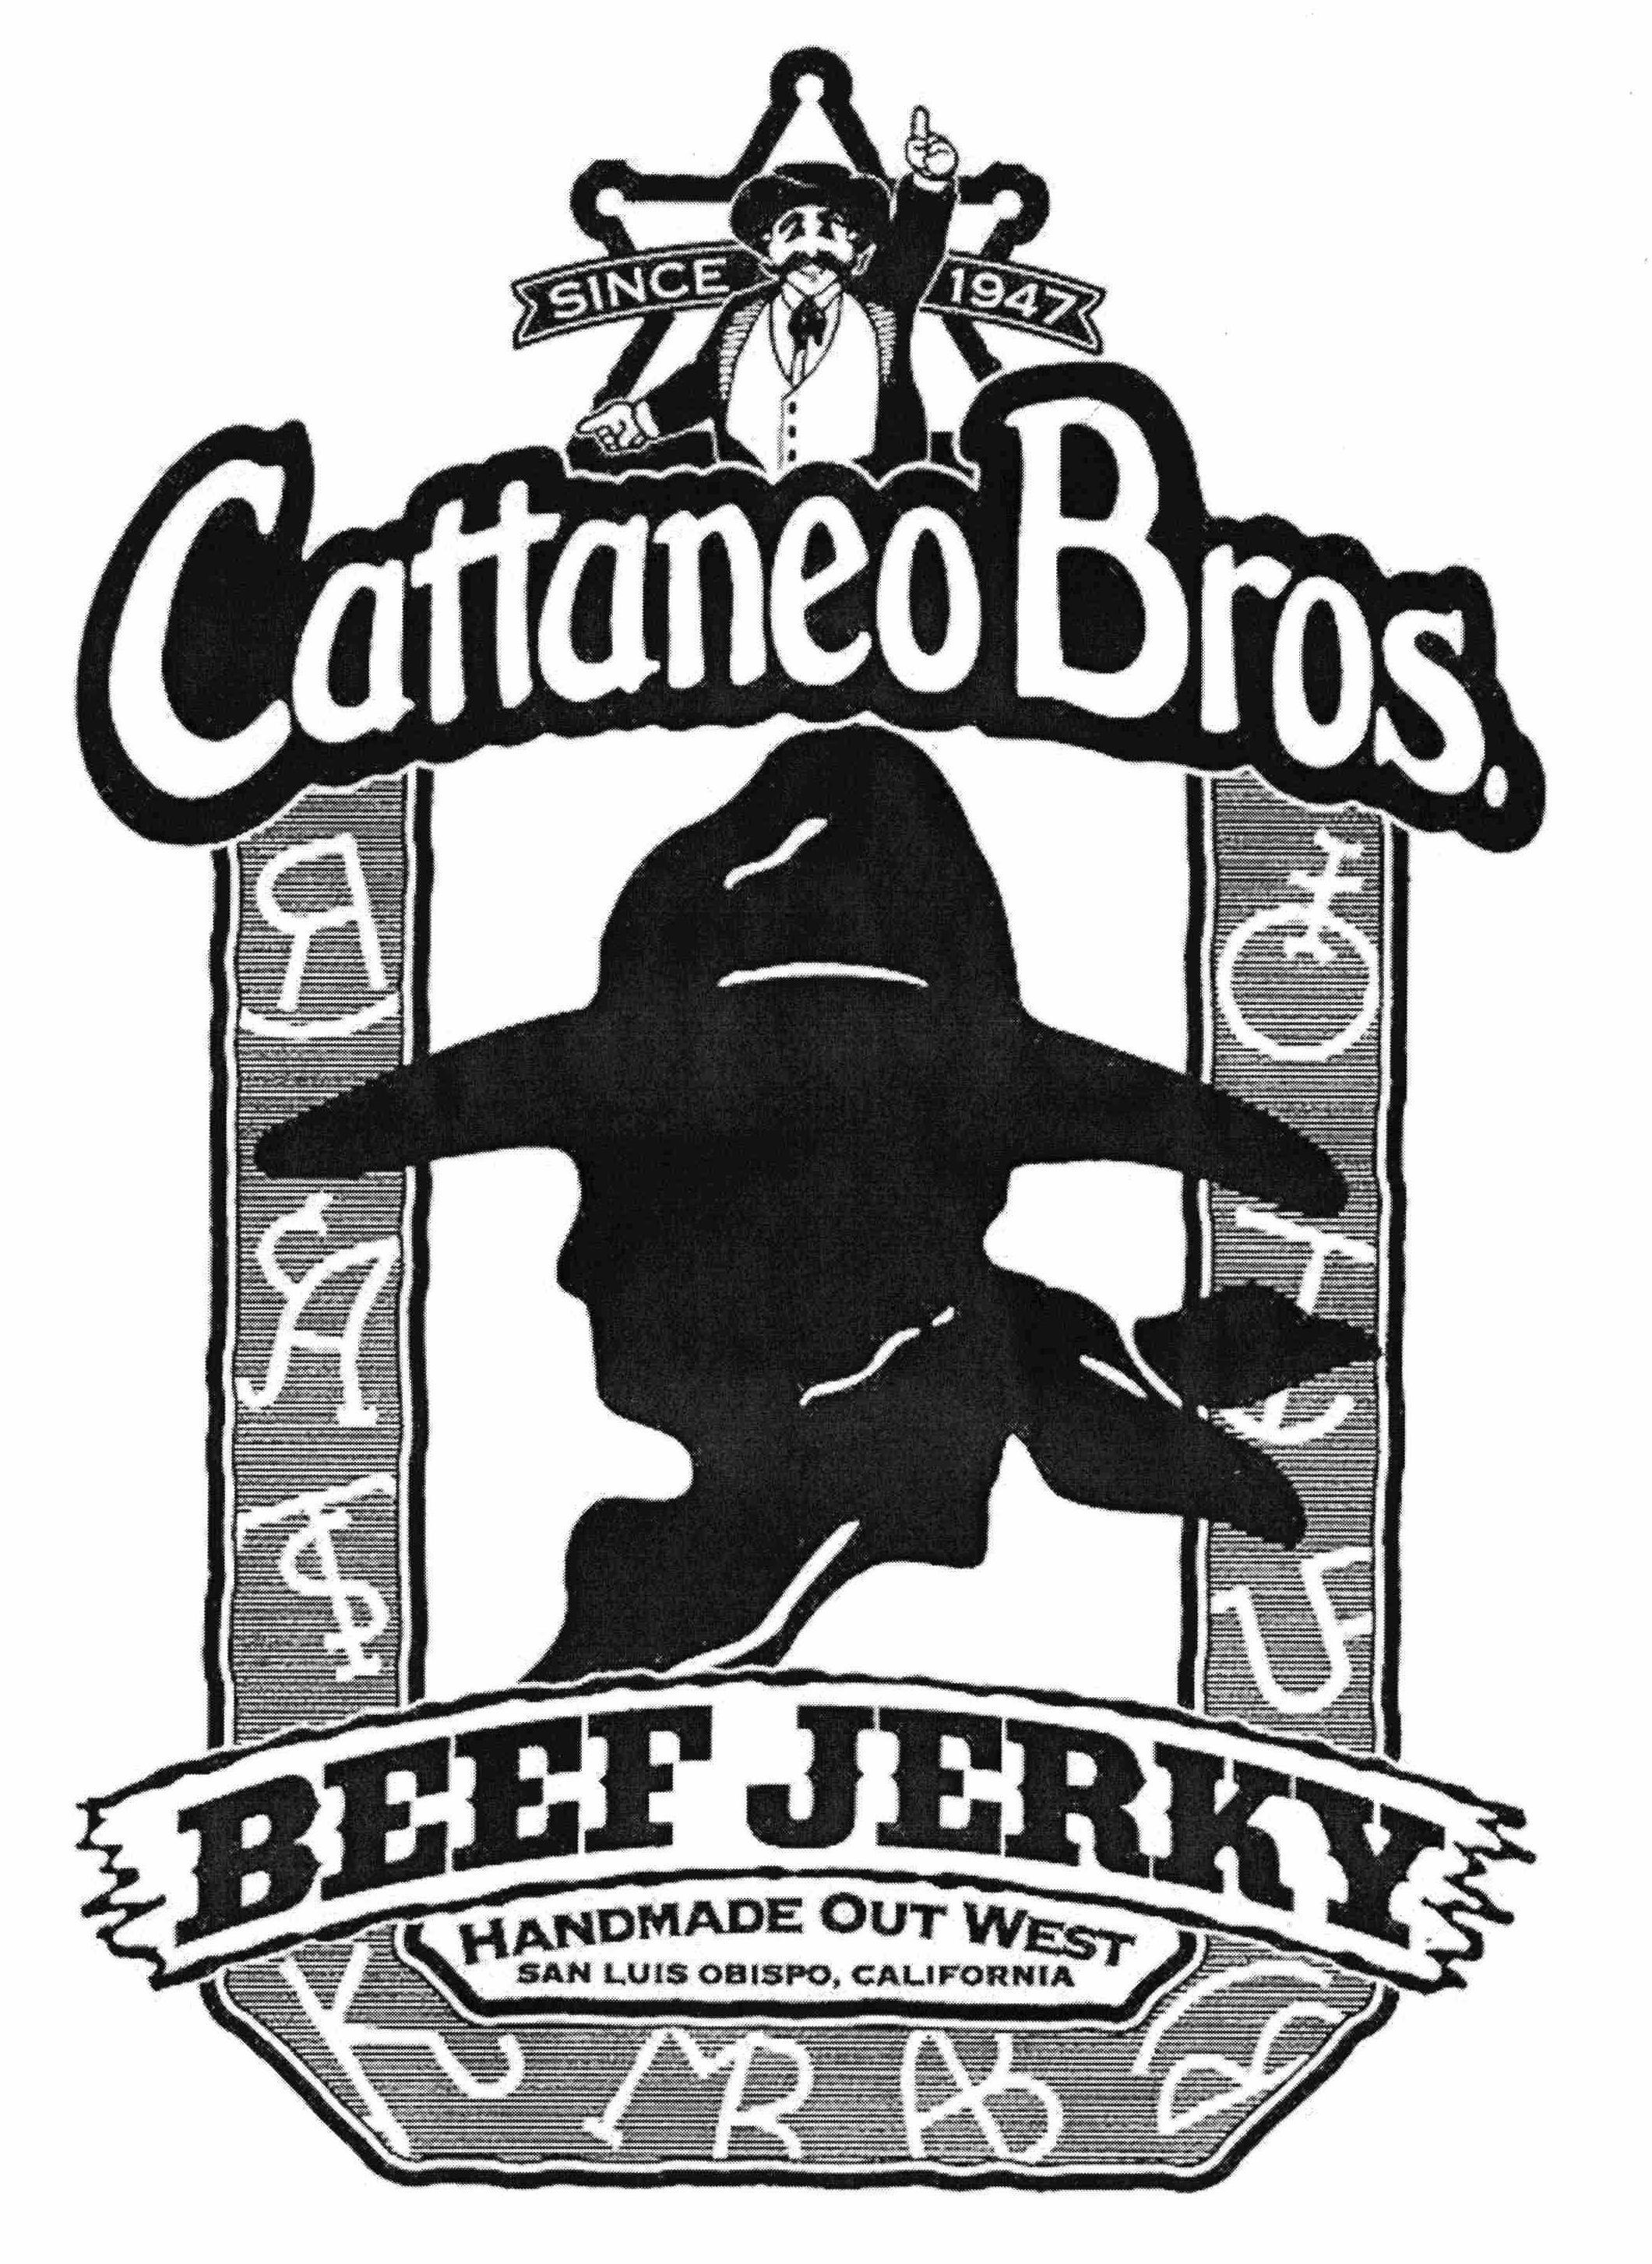  SINCE 1947 CATTANEO BROS. BEEF JERKY HANDMADE OUT WEST SAN LUIS OBISPO, CALIFORNIA